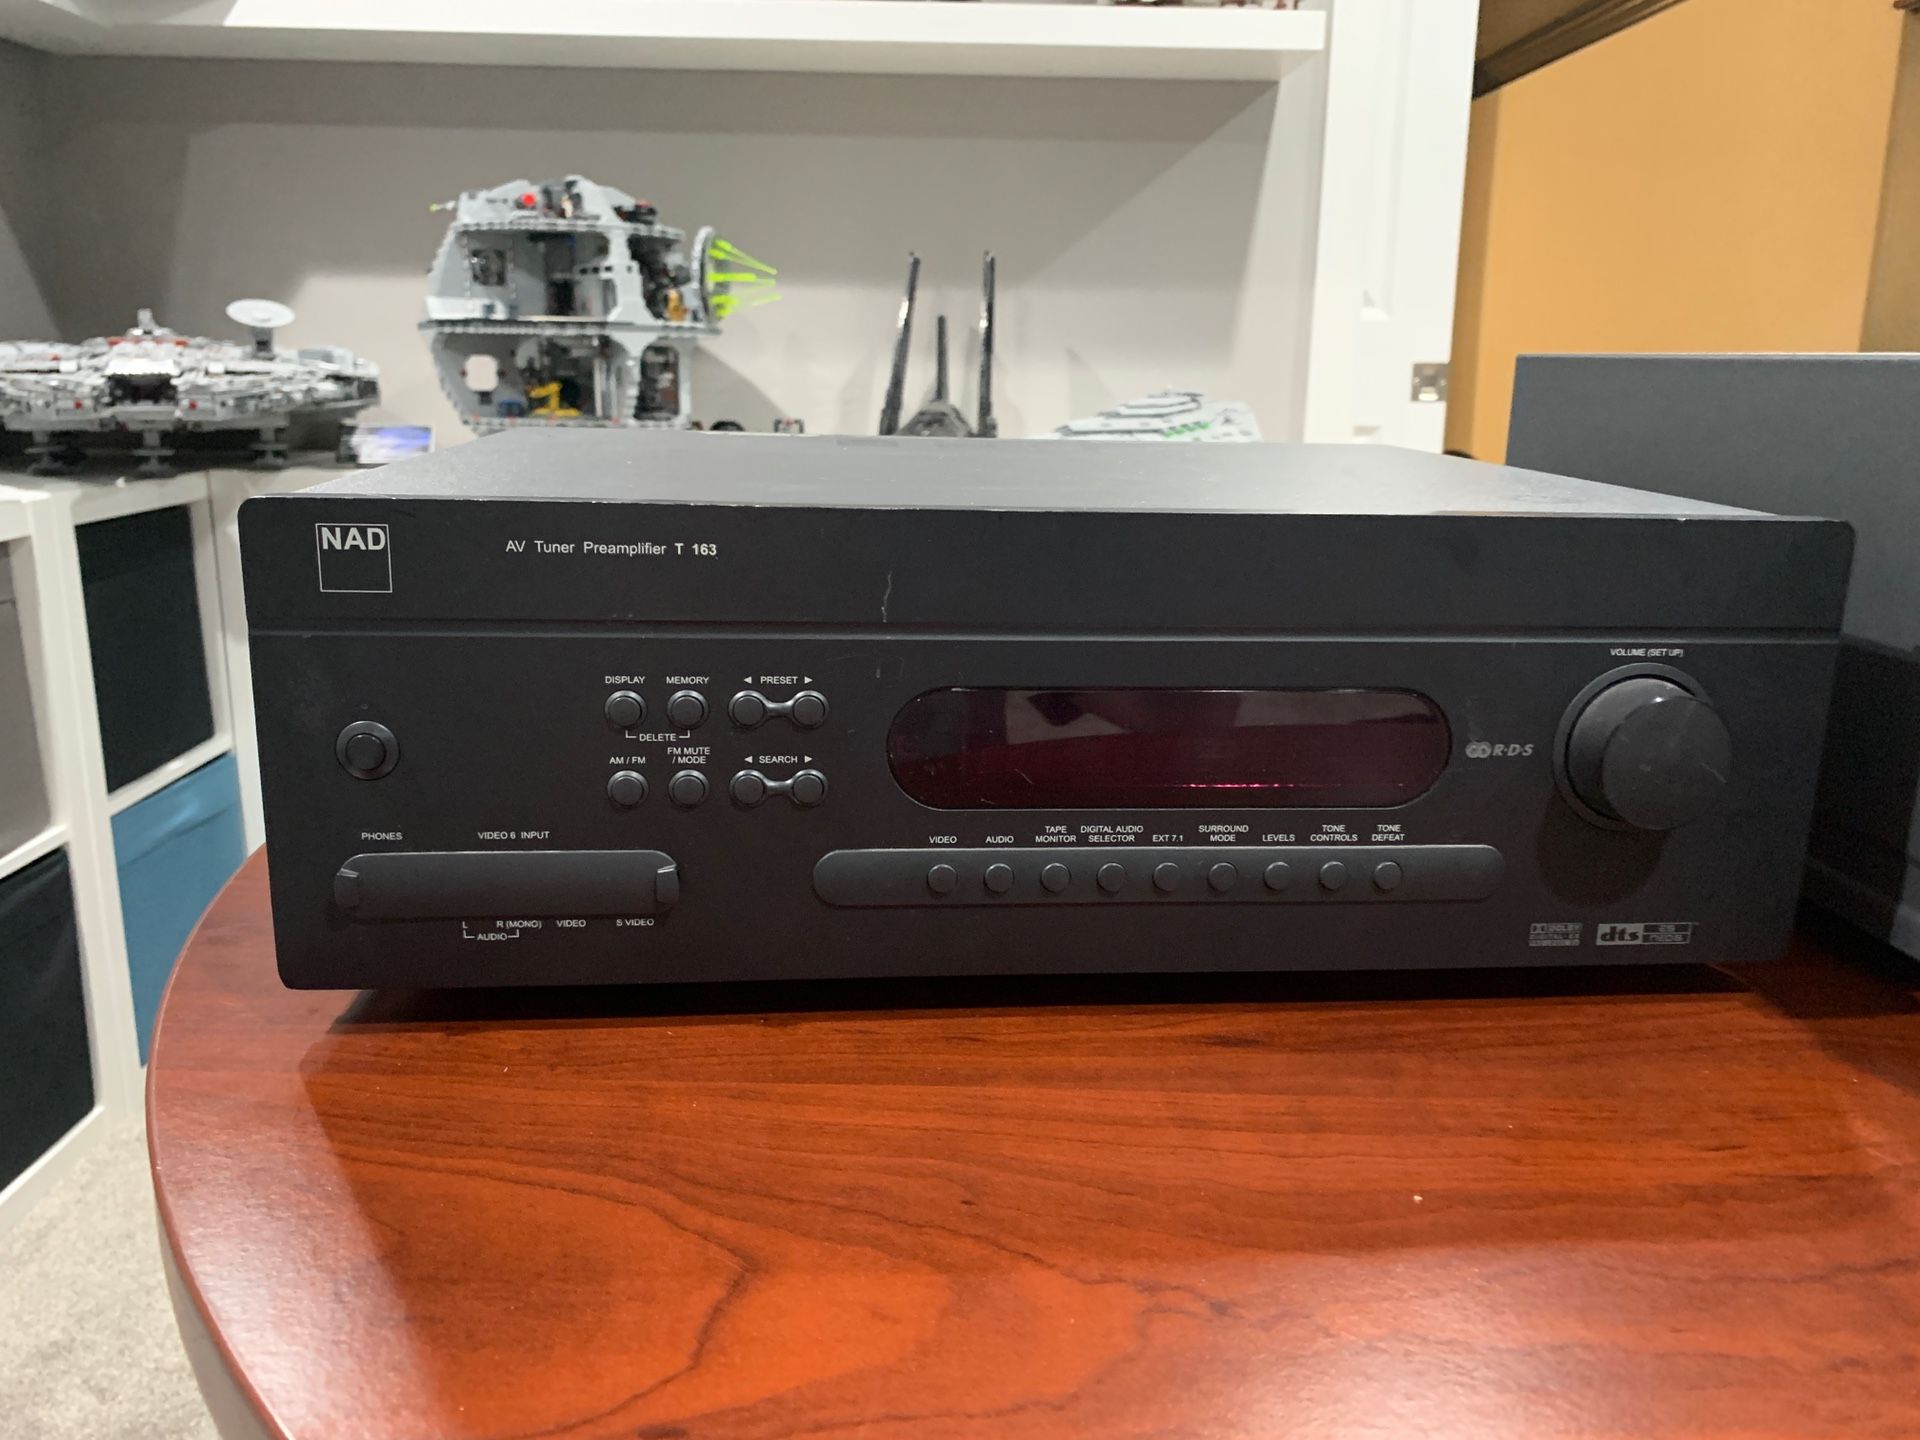 NAD Pre-Amplifier and Amplifier Receiver - Surround Sound